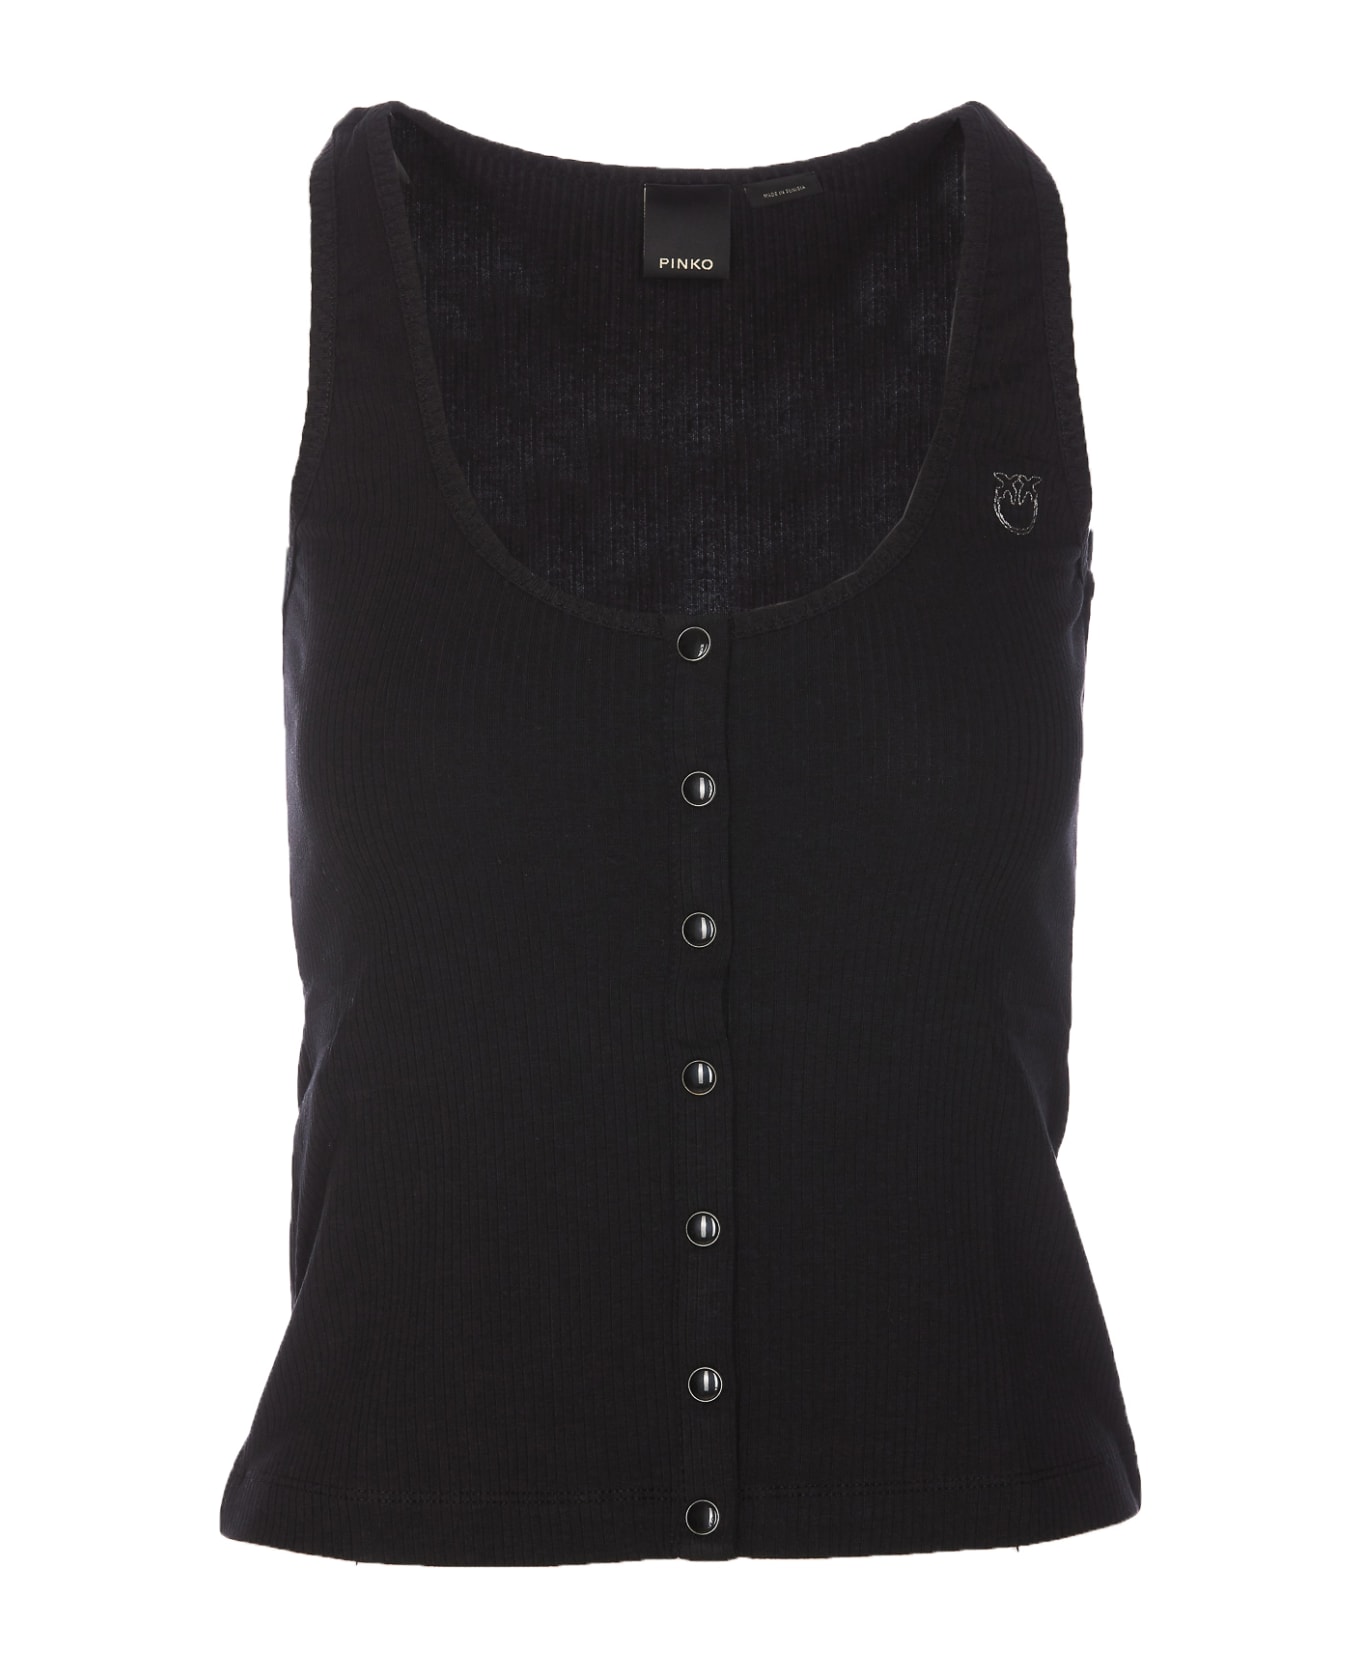 Pinko Tank Top With Nacre Buttons - Black タンクトップ